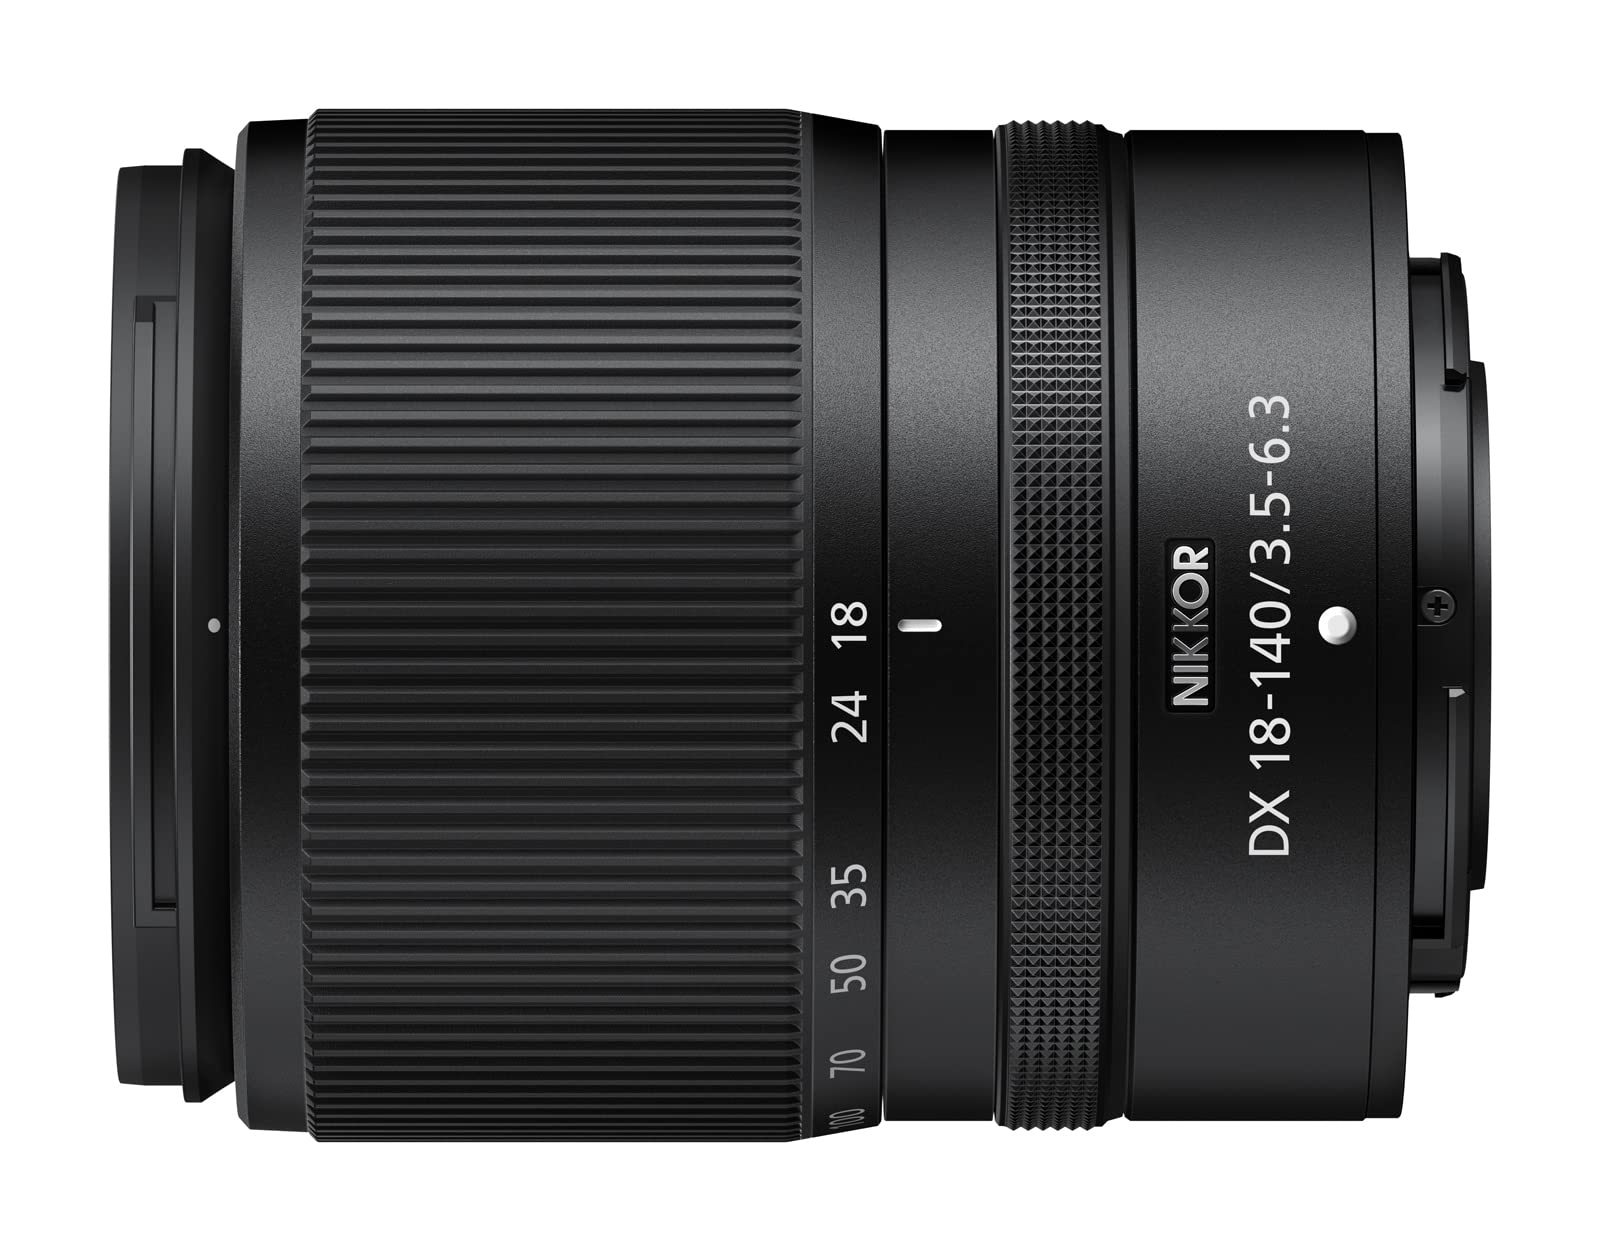 Nikon NIKKOR Z DX 18-140mm VR | Compact all-in-one zoom lens for APS-C size/DX format Z series mirrorless cameras (wide angle to telephoto) | Nikon USA Model